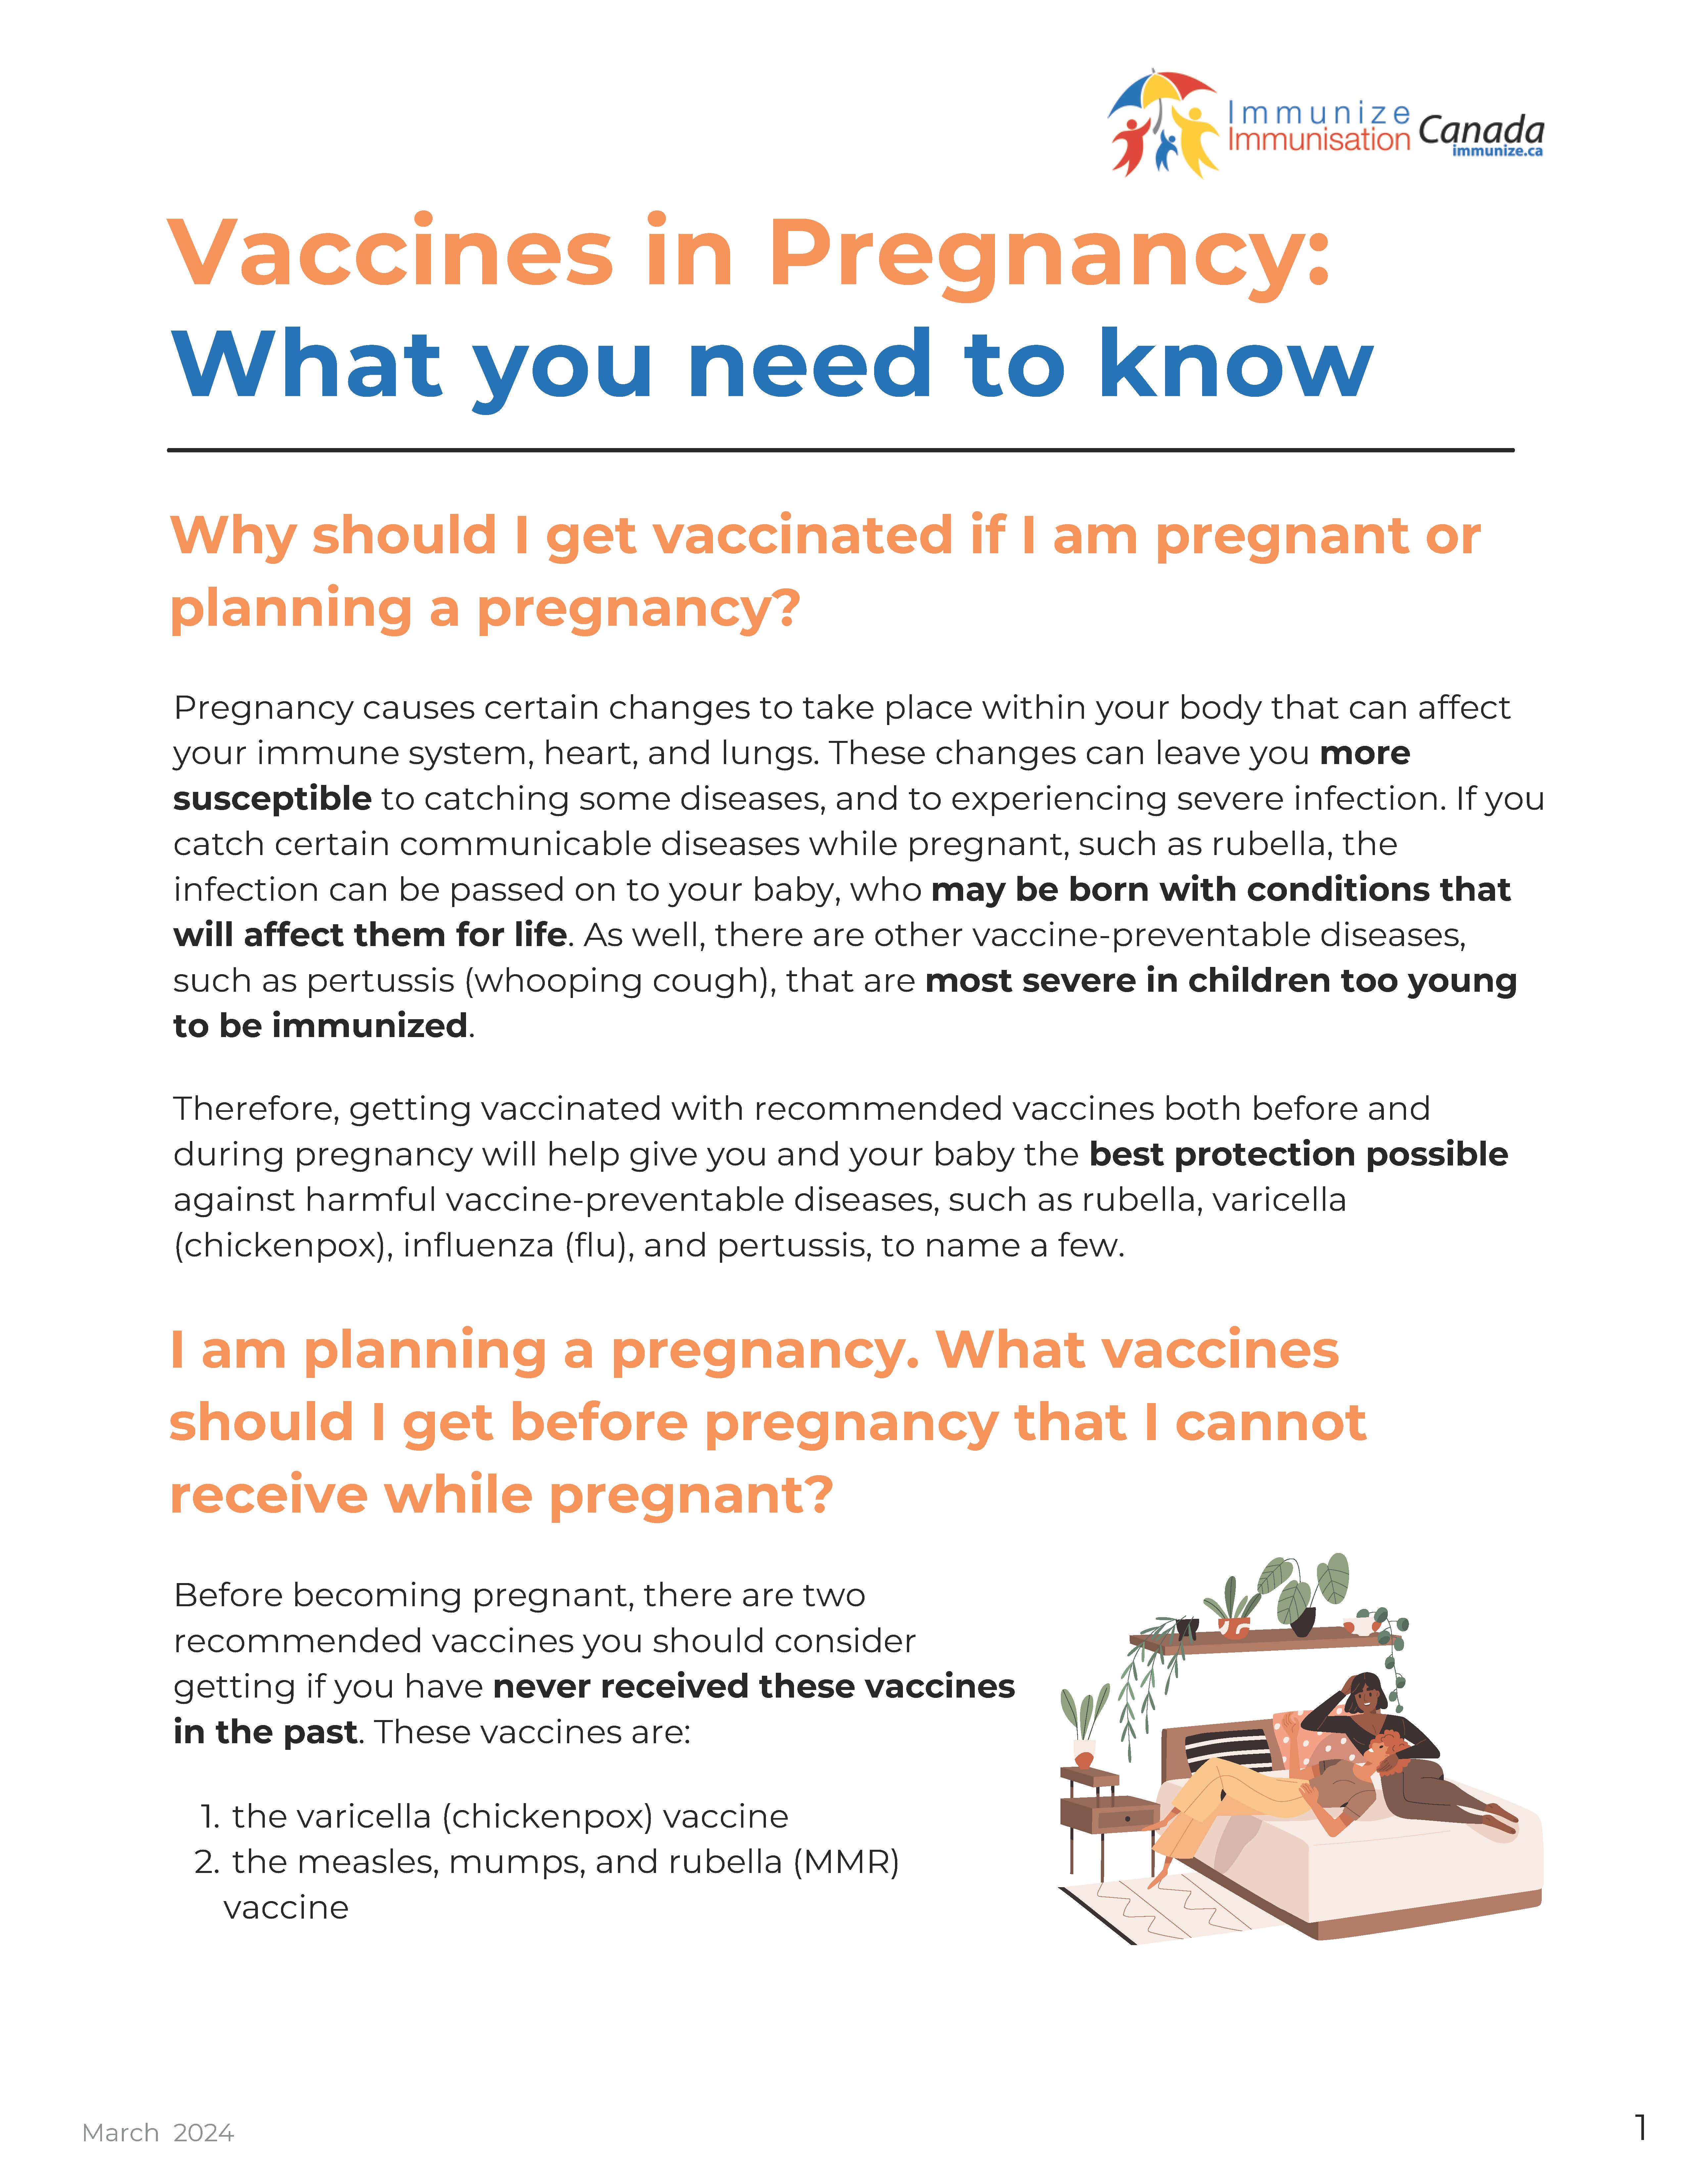 Vaccines in Pregnancy: What you need to know